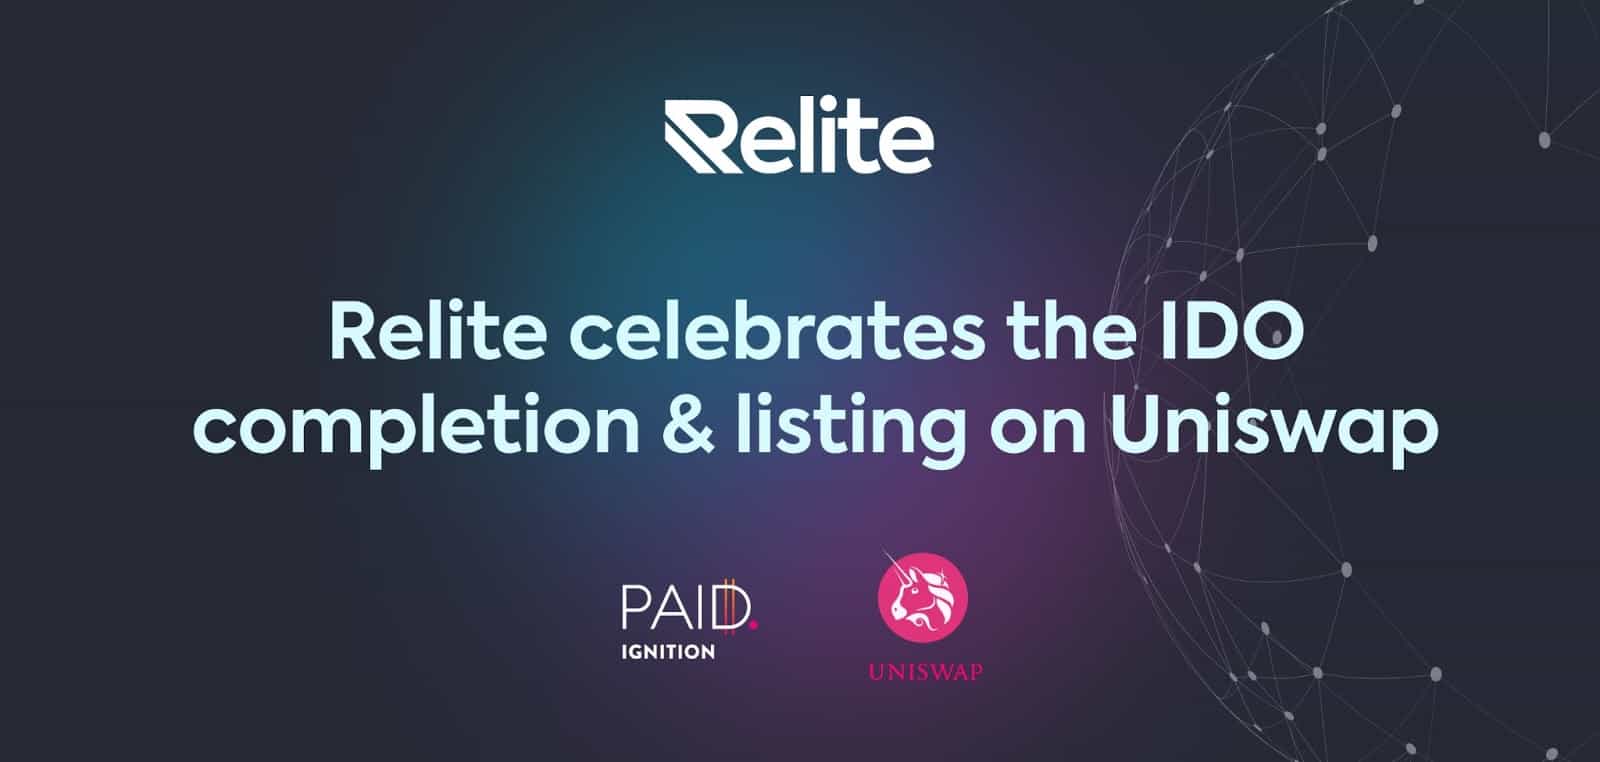 Relite-completes-ido-on-ignition-&-proceeds-with-listing-on-uniswap